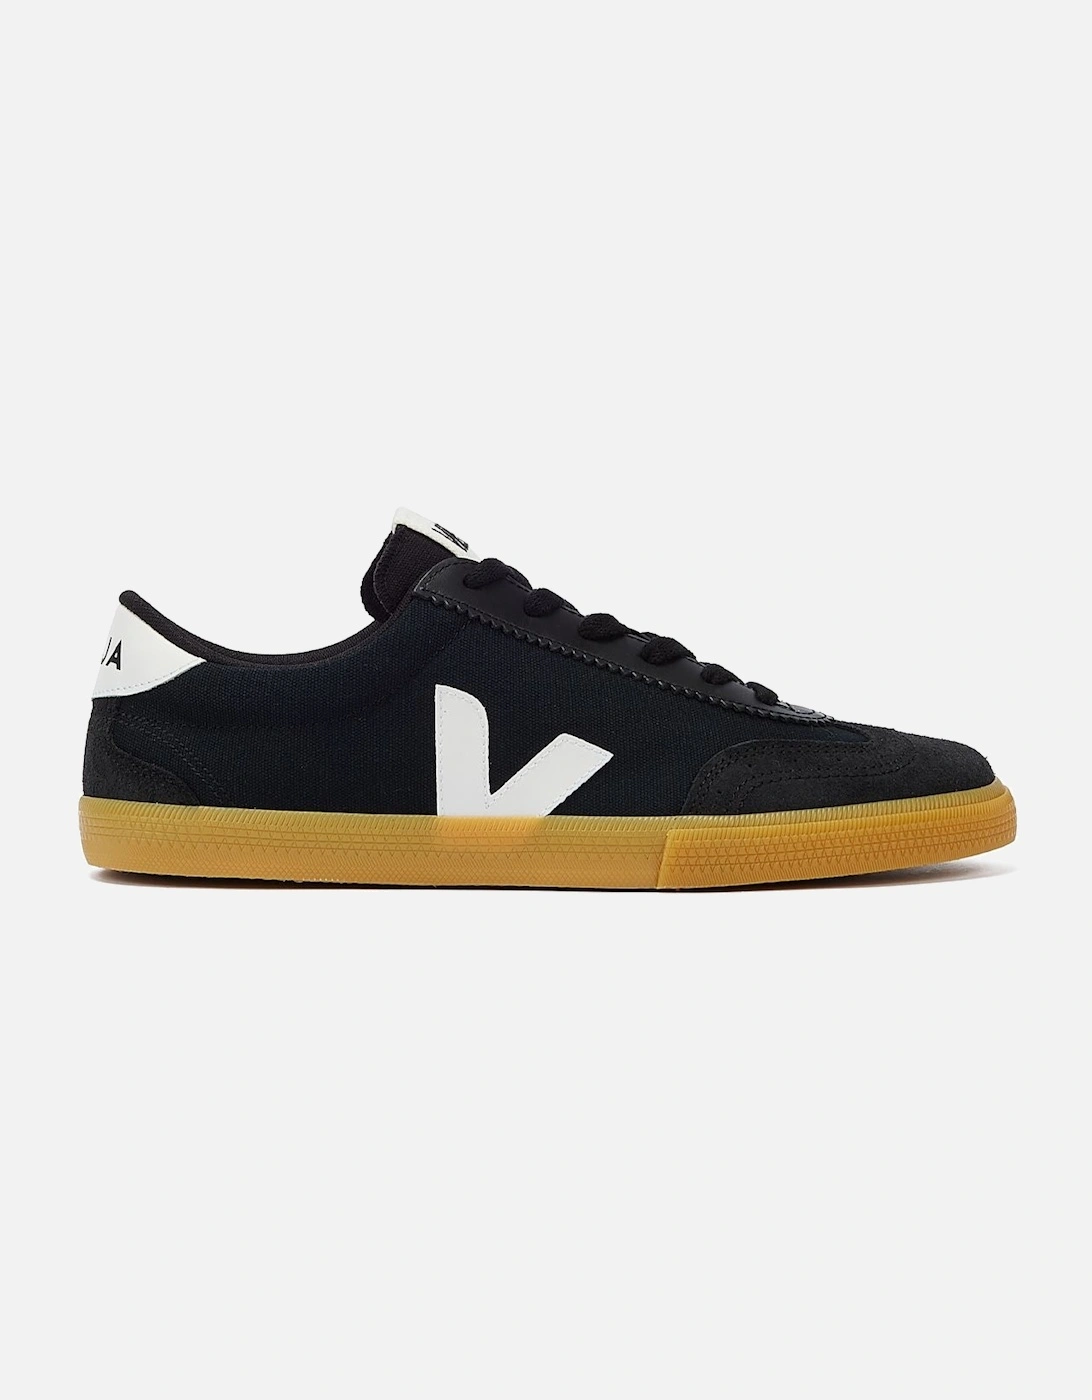 Volley Men's Black/White/Natural Trainers